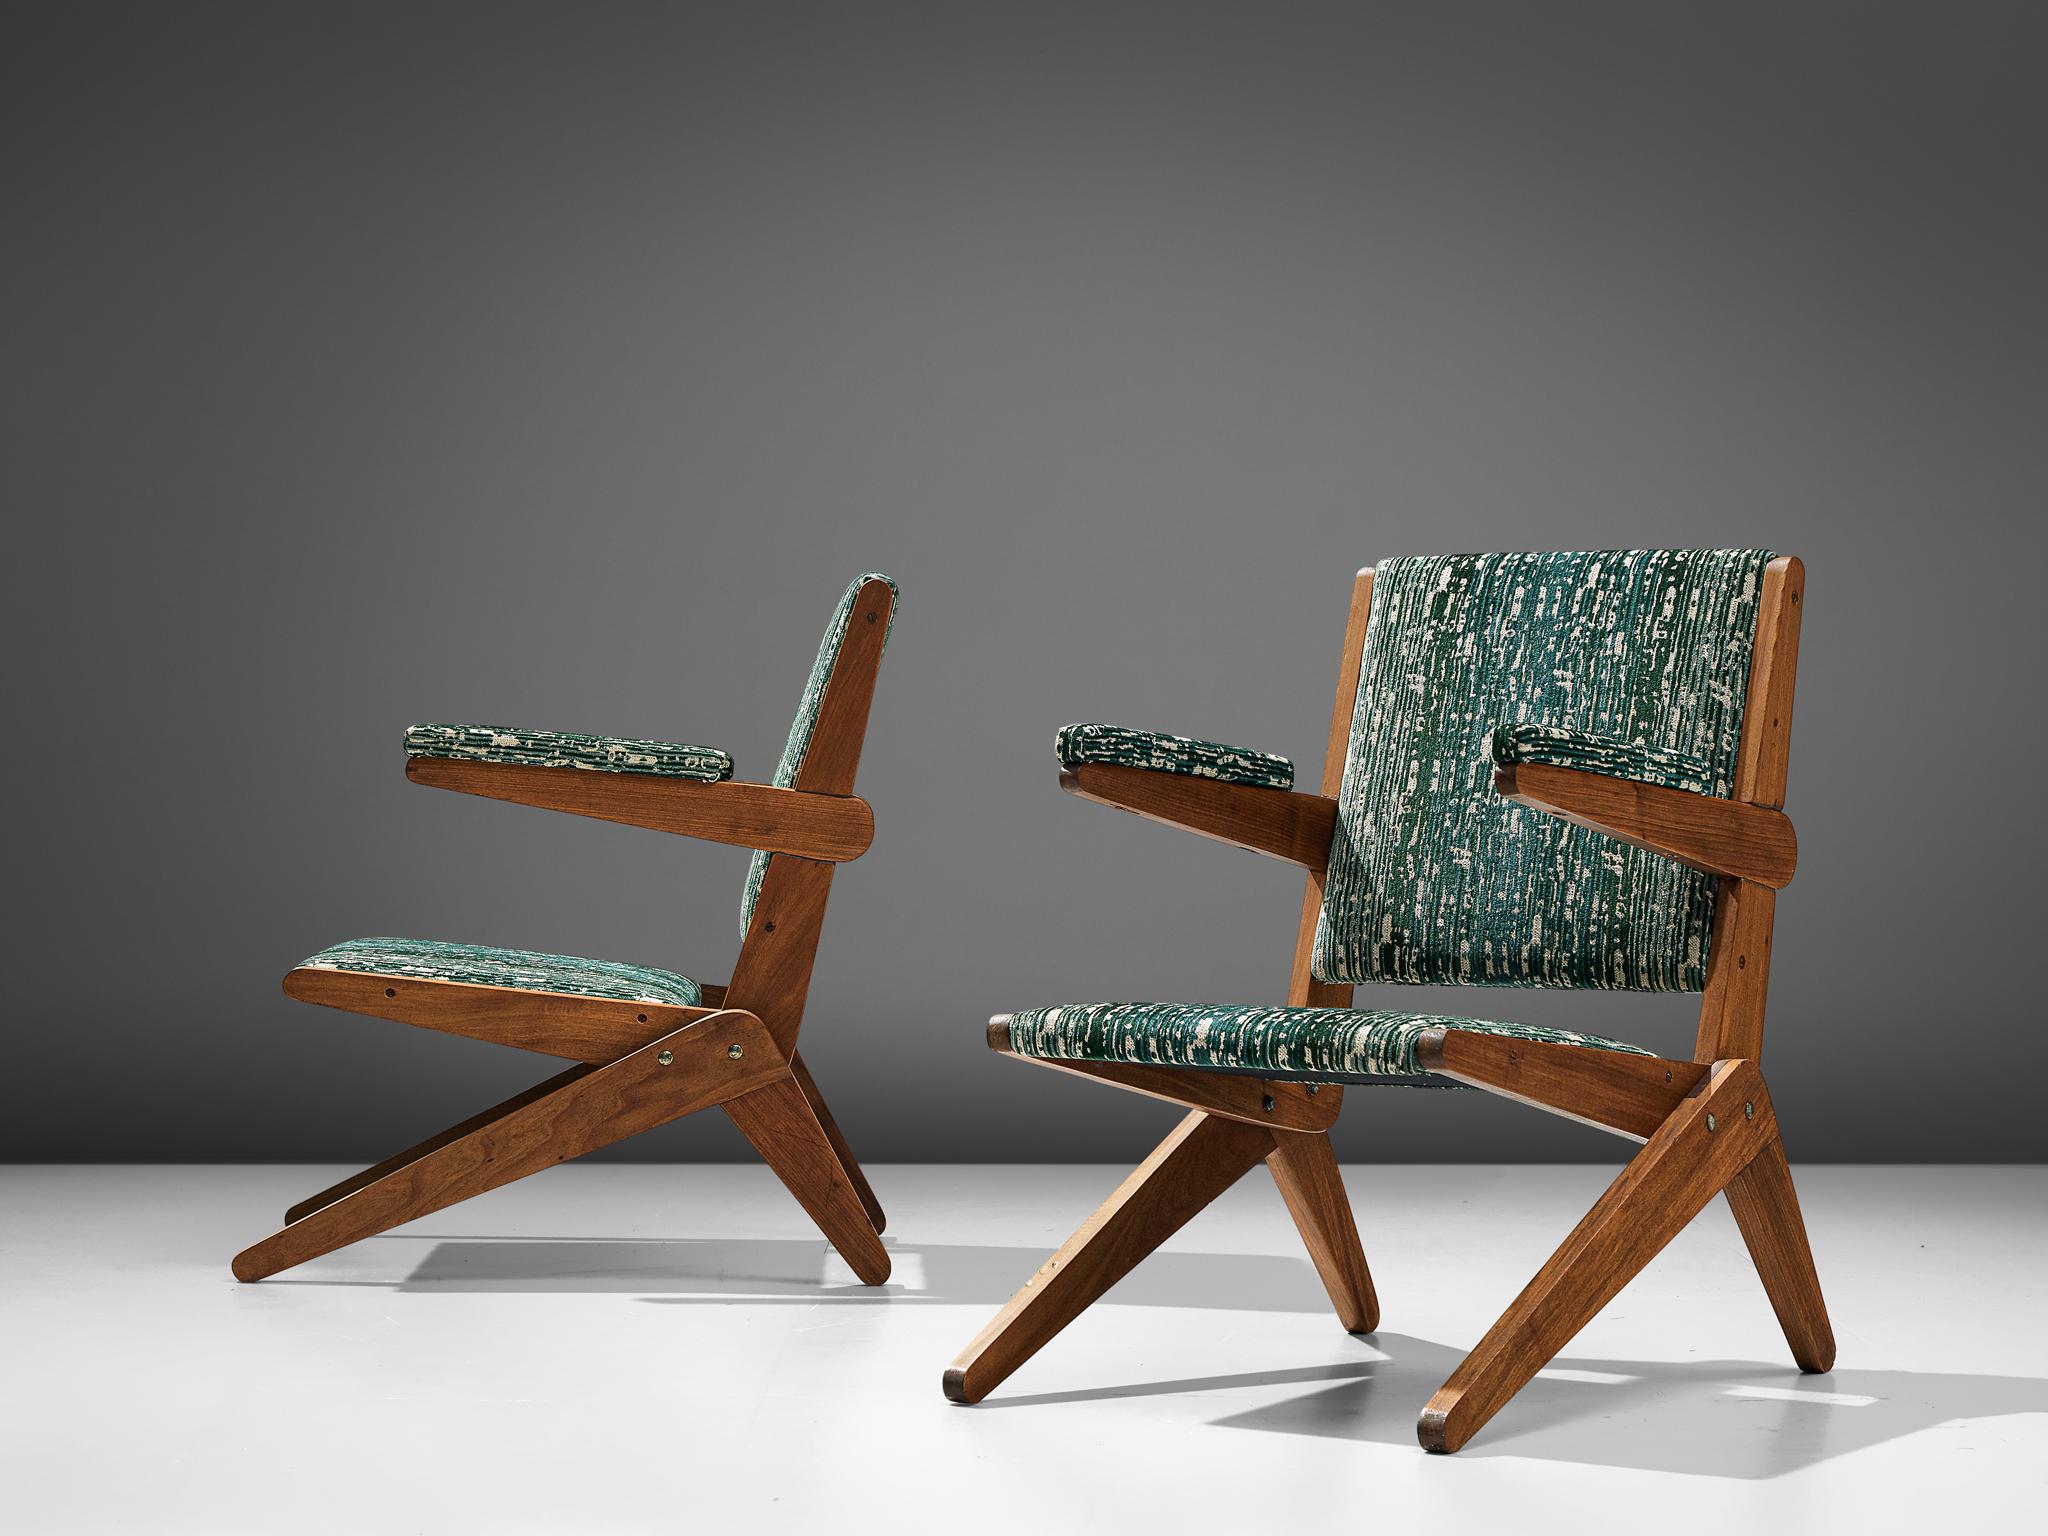 Pair of scissor armchairs, Brazilian hardwood and fabric, Brazil, circa 1950

These exceptionally rare armchairs from Brazil embraces the quintessential Brazilian ethos of the 1950s. The design bears the beauty of Brazil's natural environment